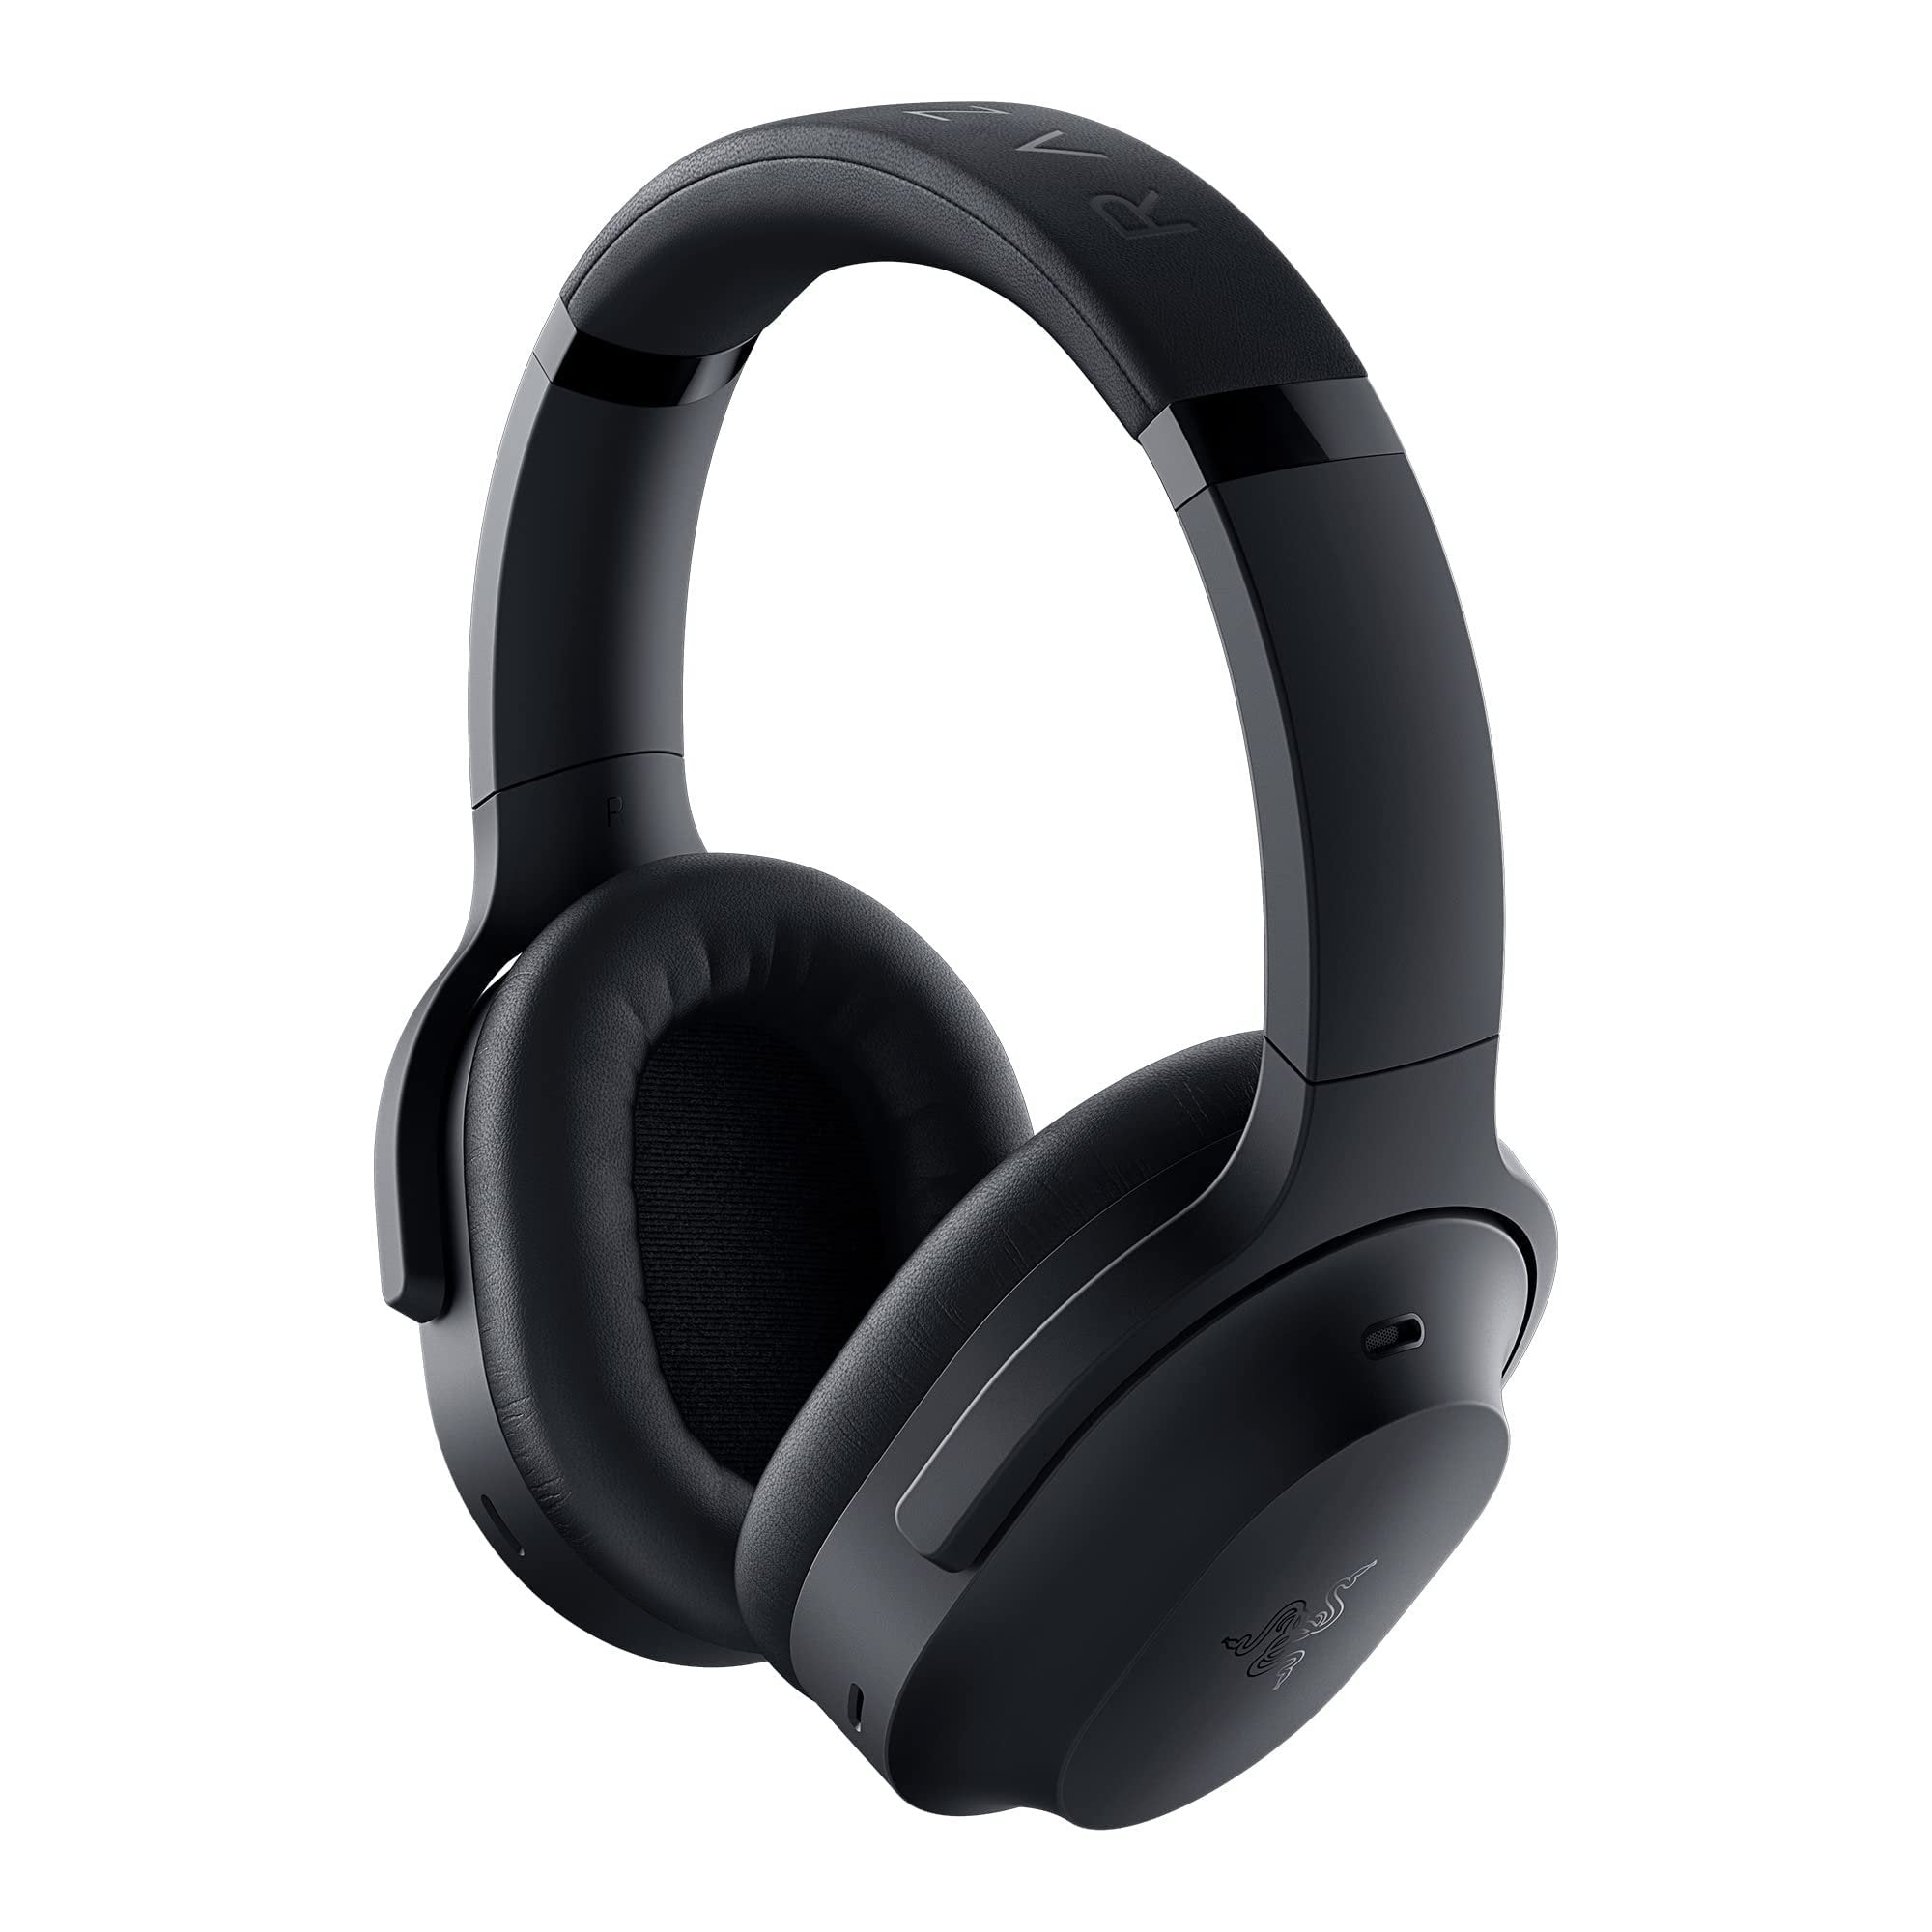 Razer Barracuda Pro Wireless Gaming & Mobile Headset (PC, PlayStation, Switch, Android, iOS): Hybrid ANC - 2.4GHz Wireless + Bluetooth - THX AAA - 50mm Drivers - Integrated Mic- Black (Renewed)